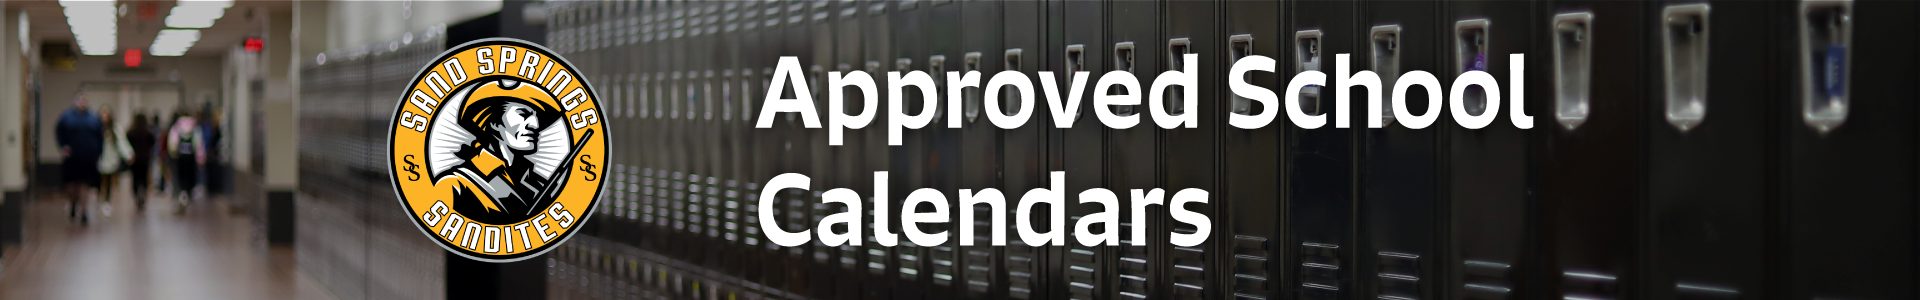 Approved School Calendars